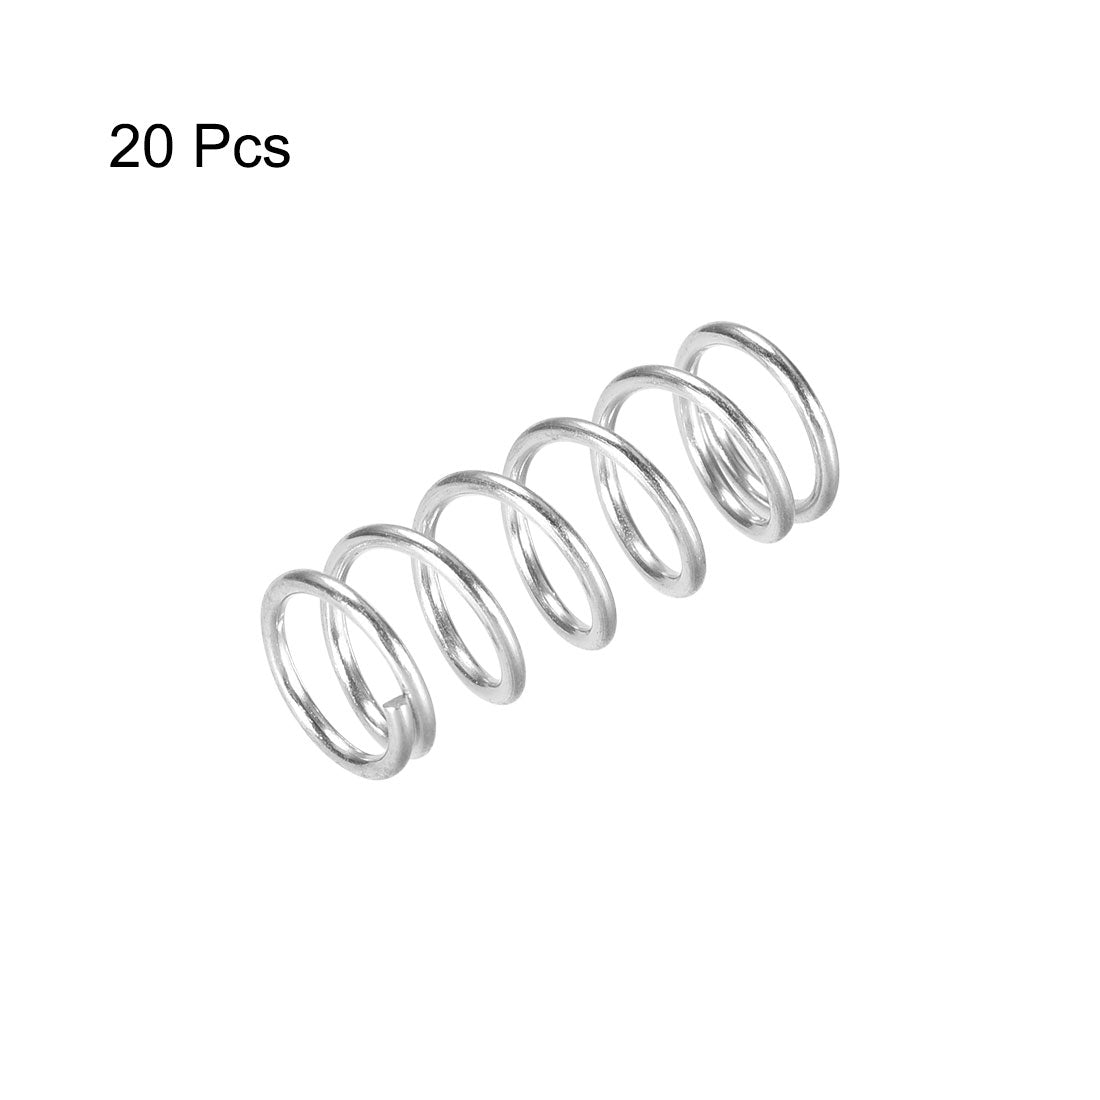 Uxcell Uxcell Heated Bed Springs for 3D Printer Extruder Compression Spring, 9 x 22 mm 30pcs